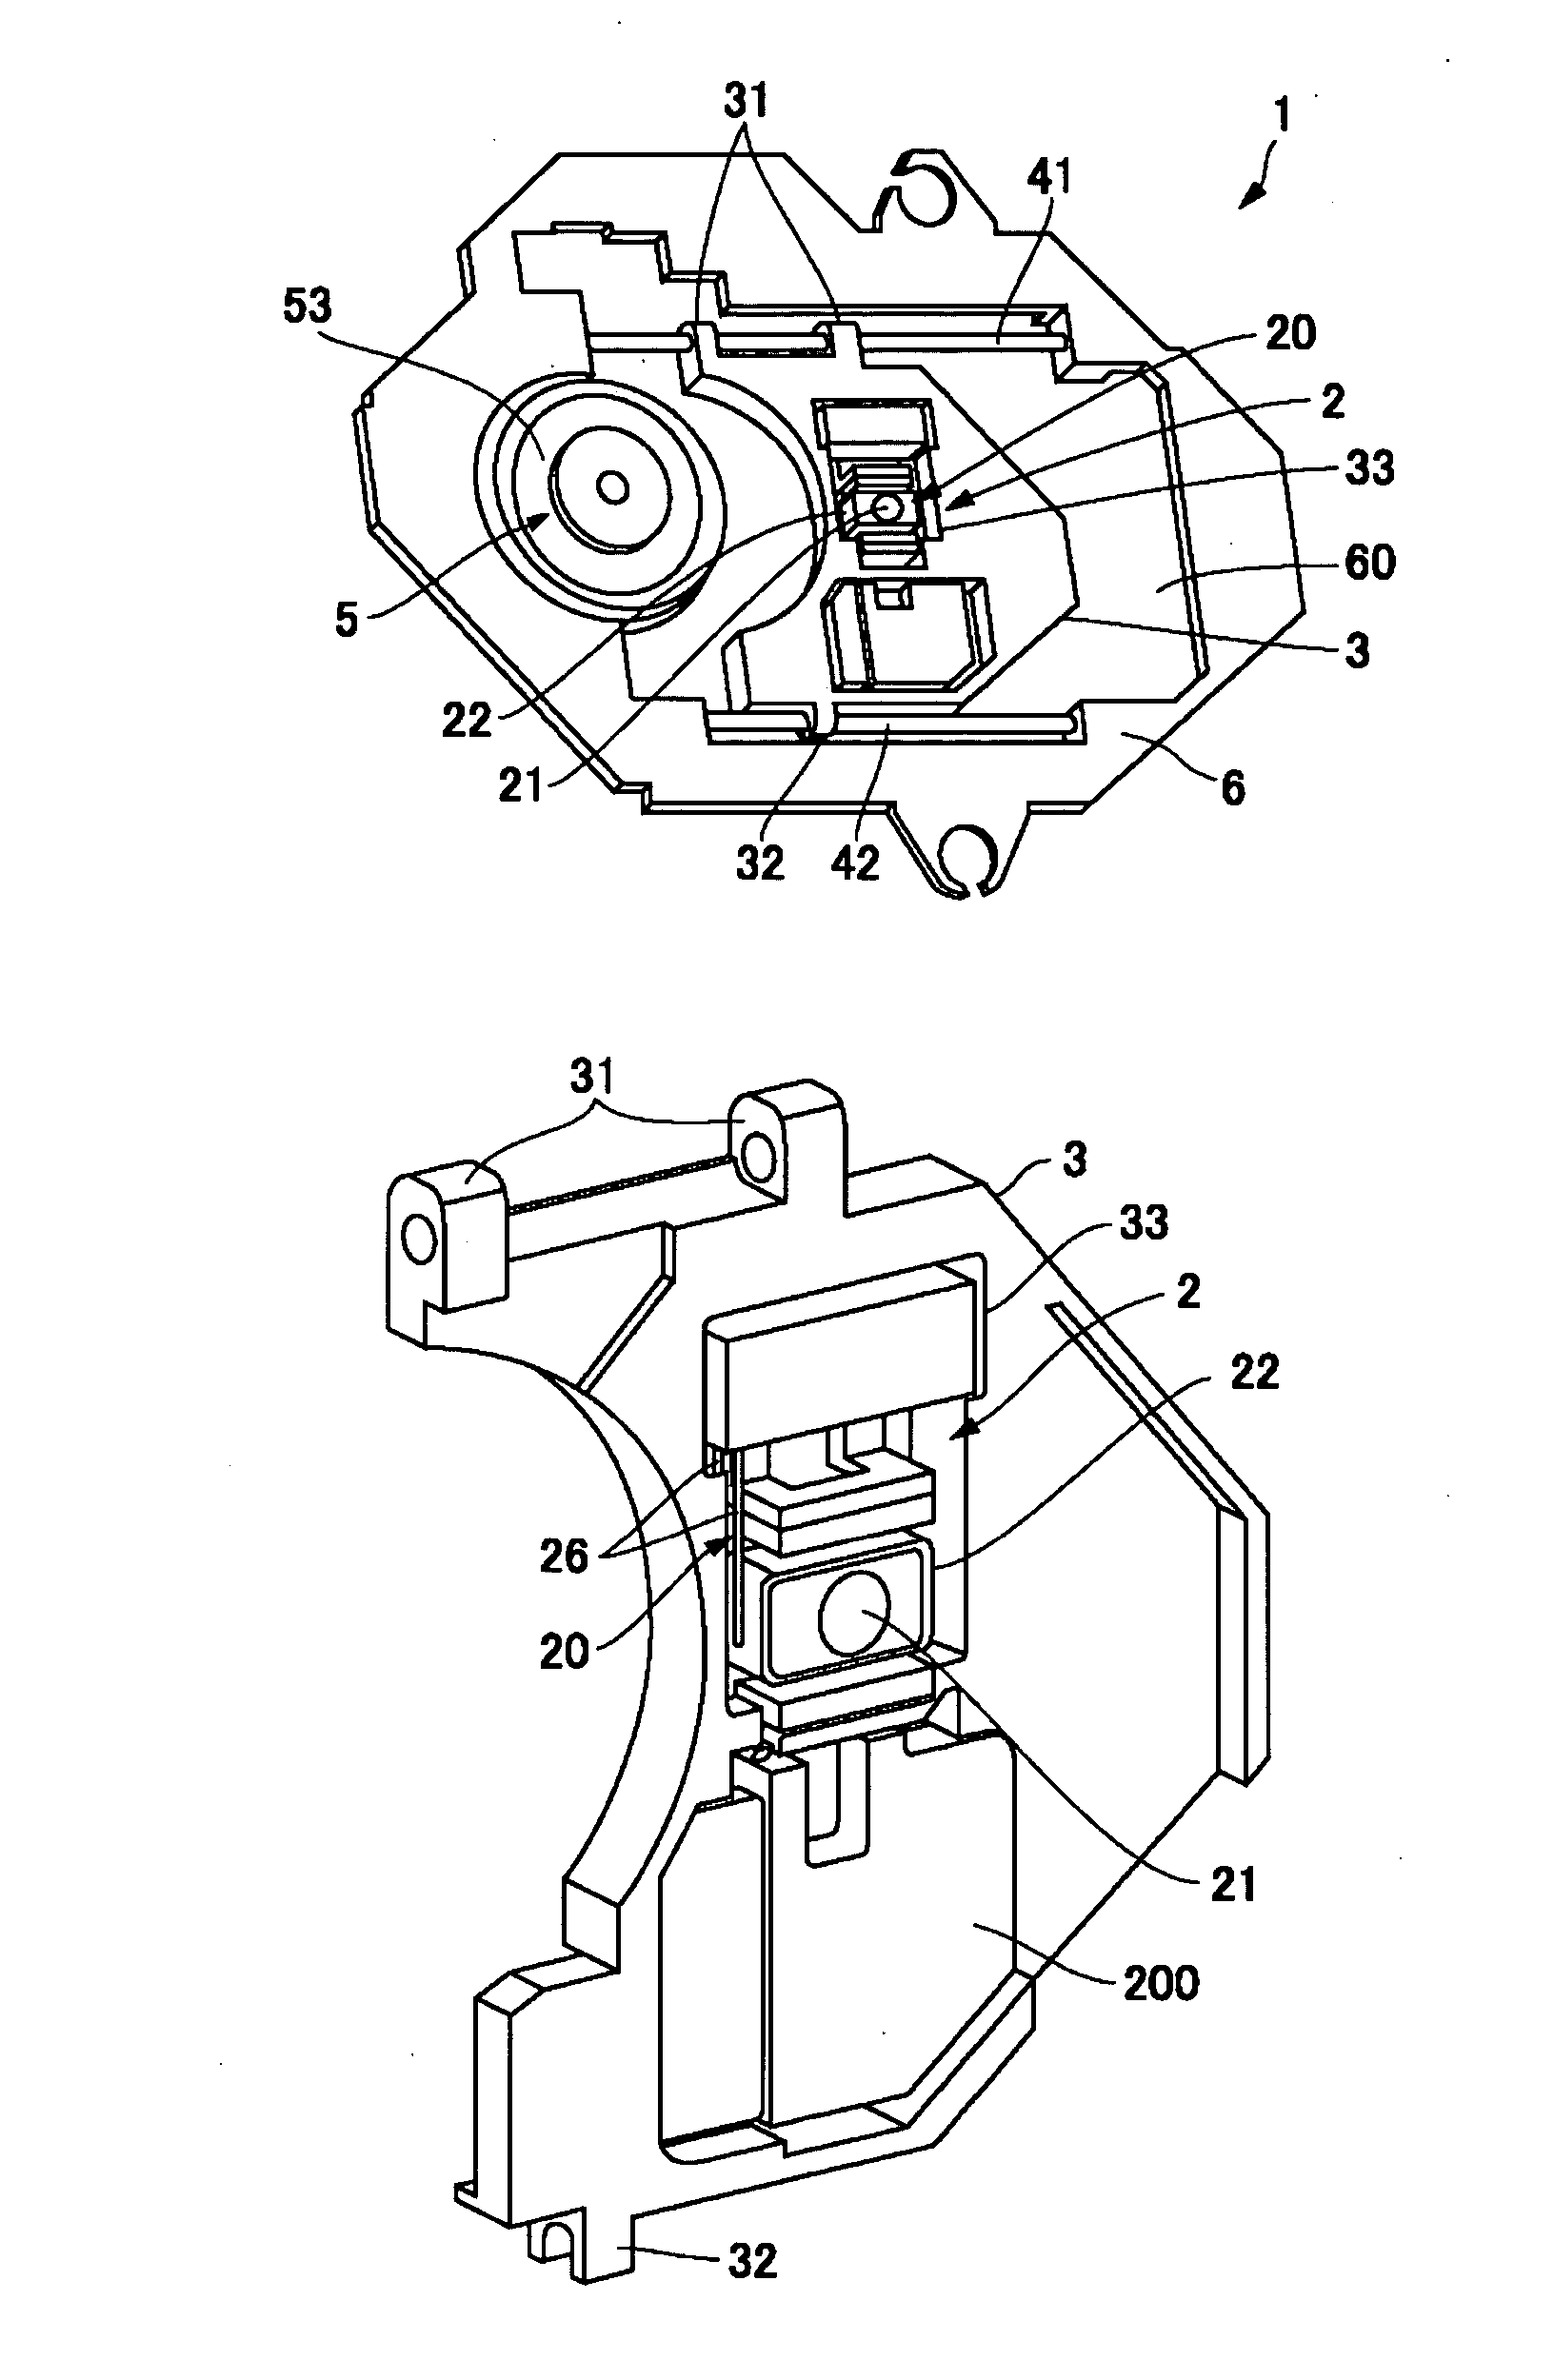 Optical recording disk device and manufacturing method therefor